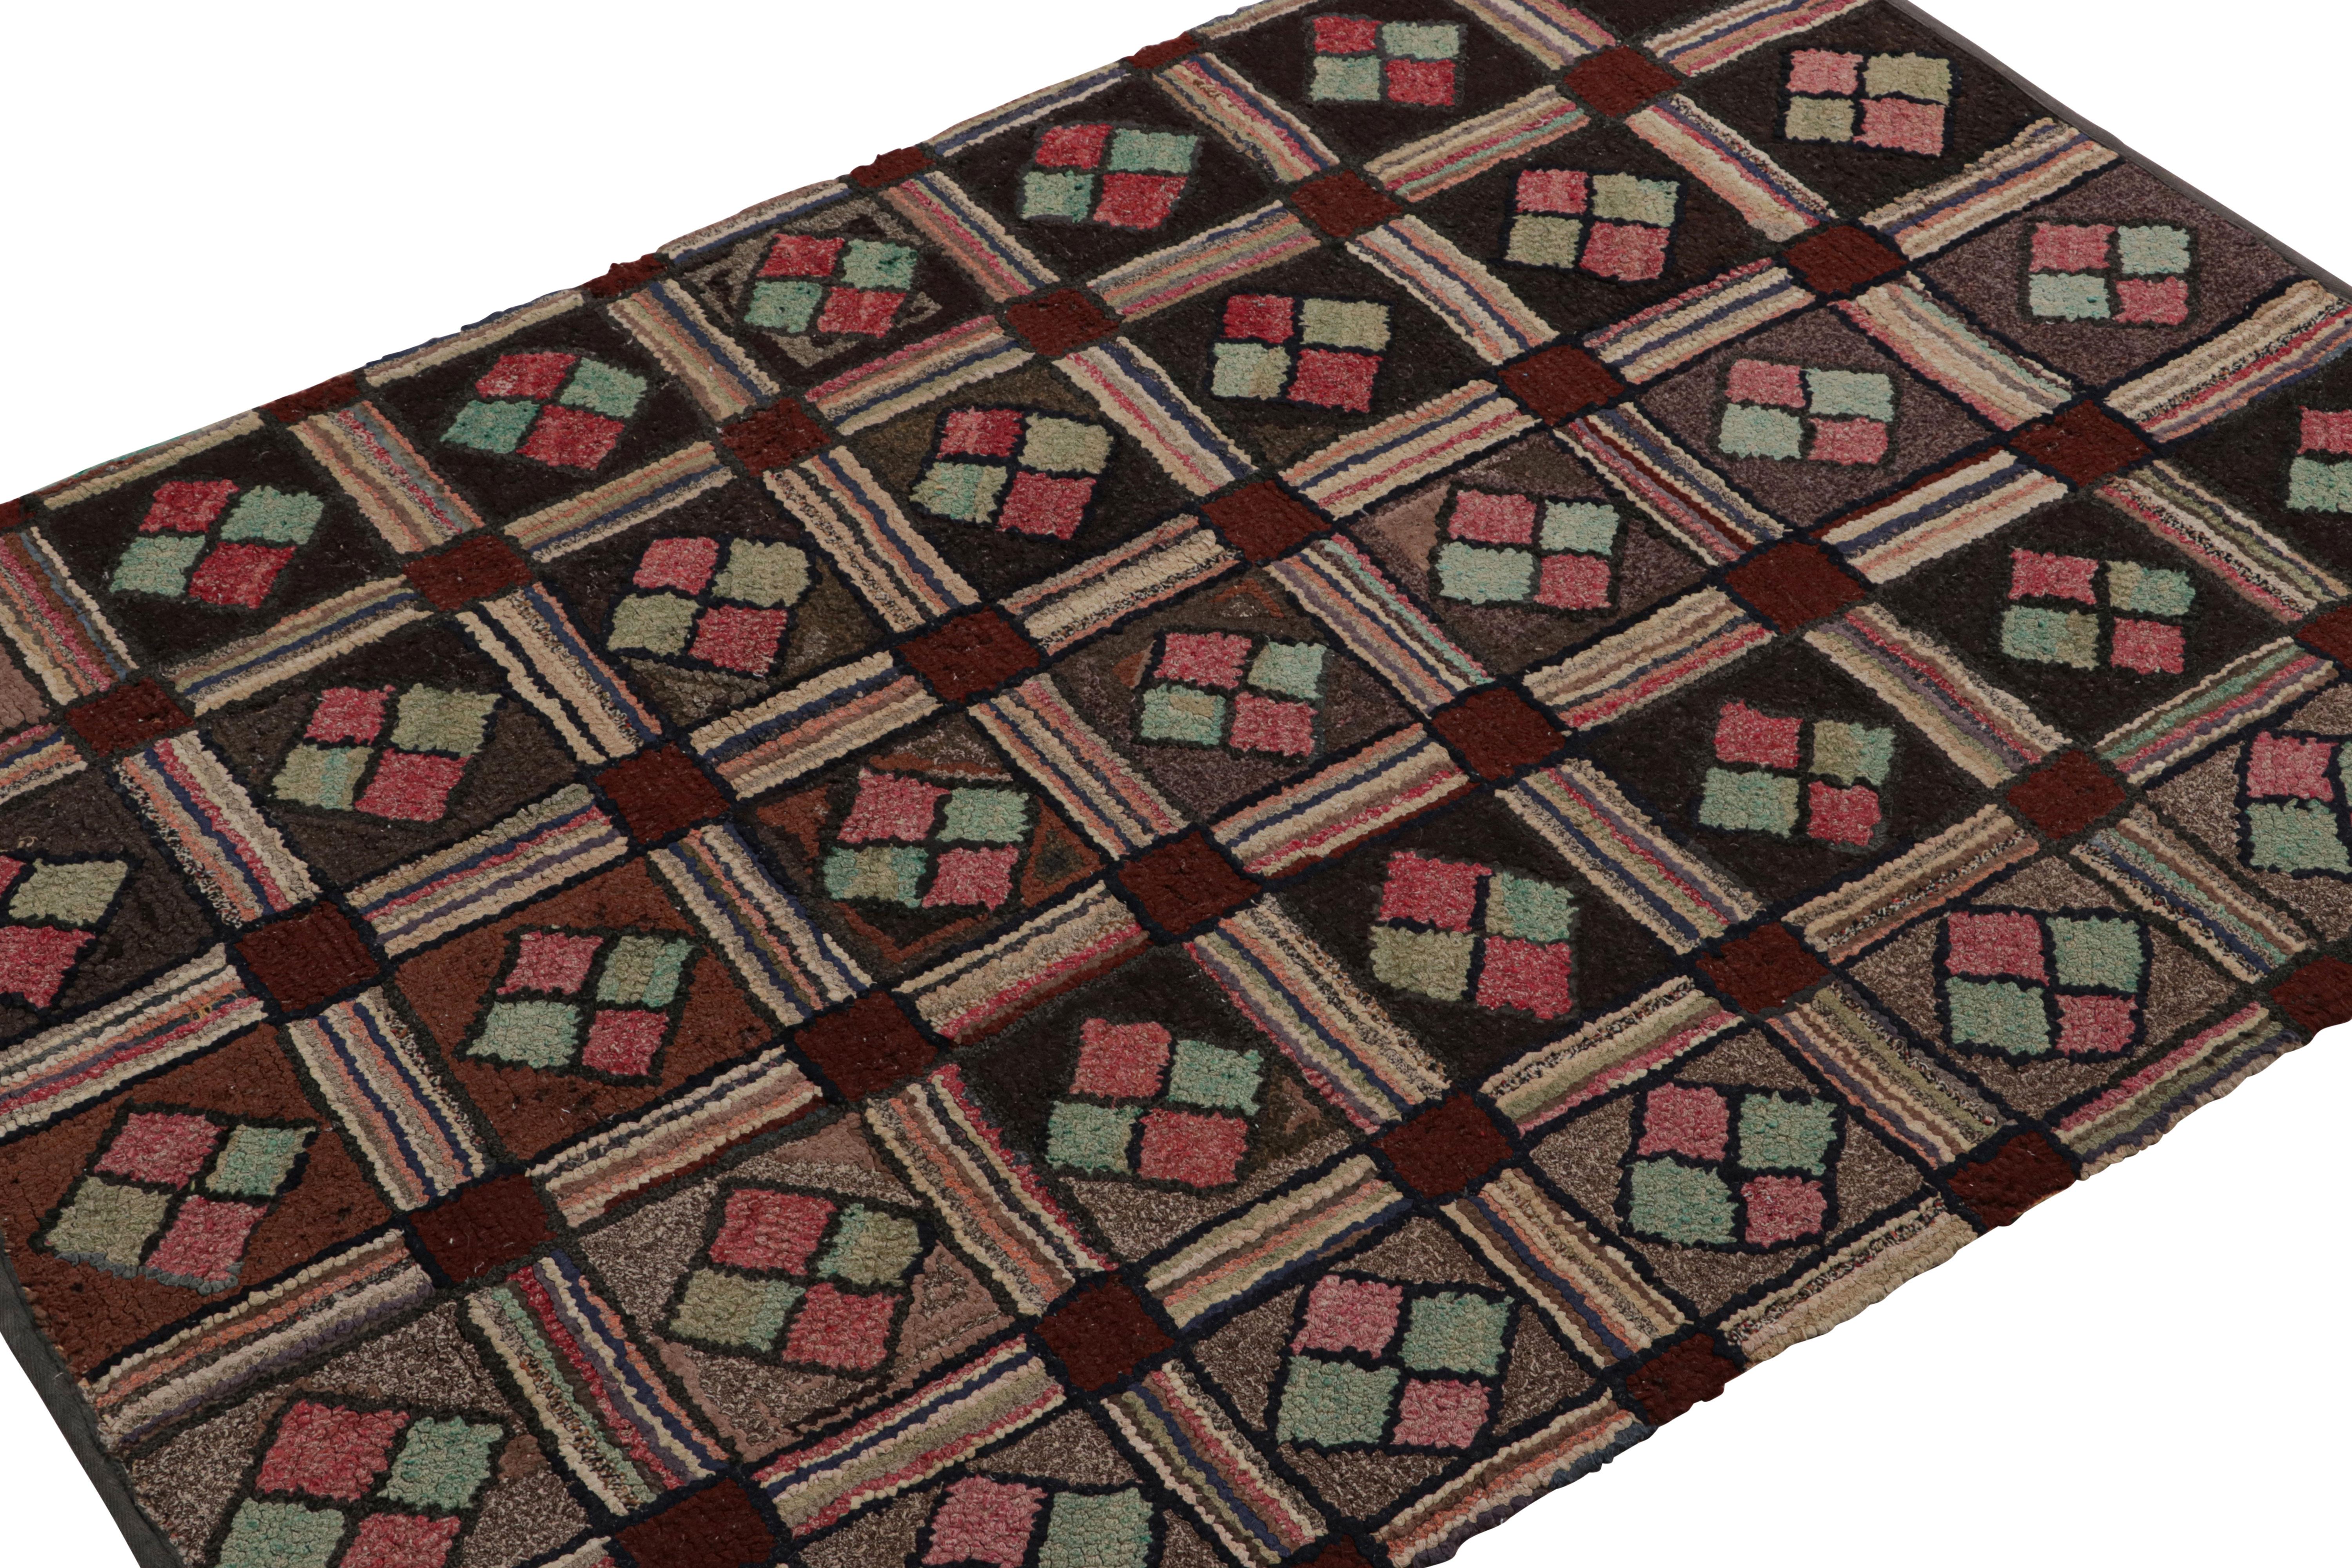 A rare 3x4 antique hooked rug of United States’ provenance, handmade in wool and fabric, circa 1920-1930, featuring repetitive geometric patterns. 

On the Design: 

This collectible piece enjoys repetitive geometric patterns arranged in grids in a